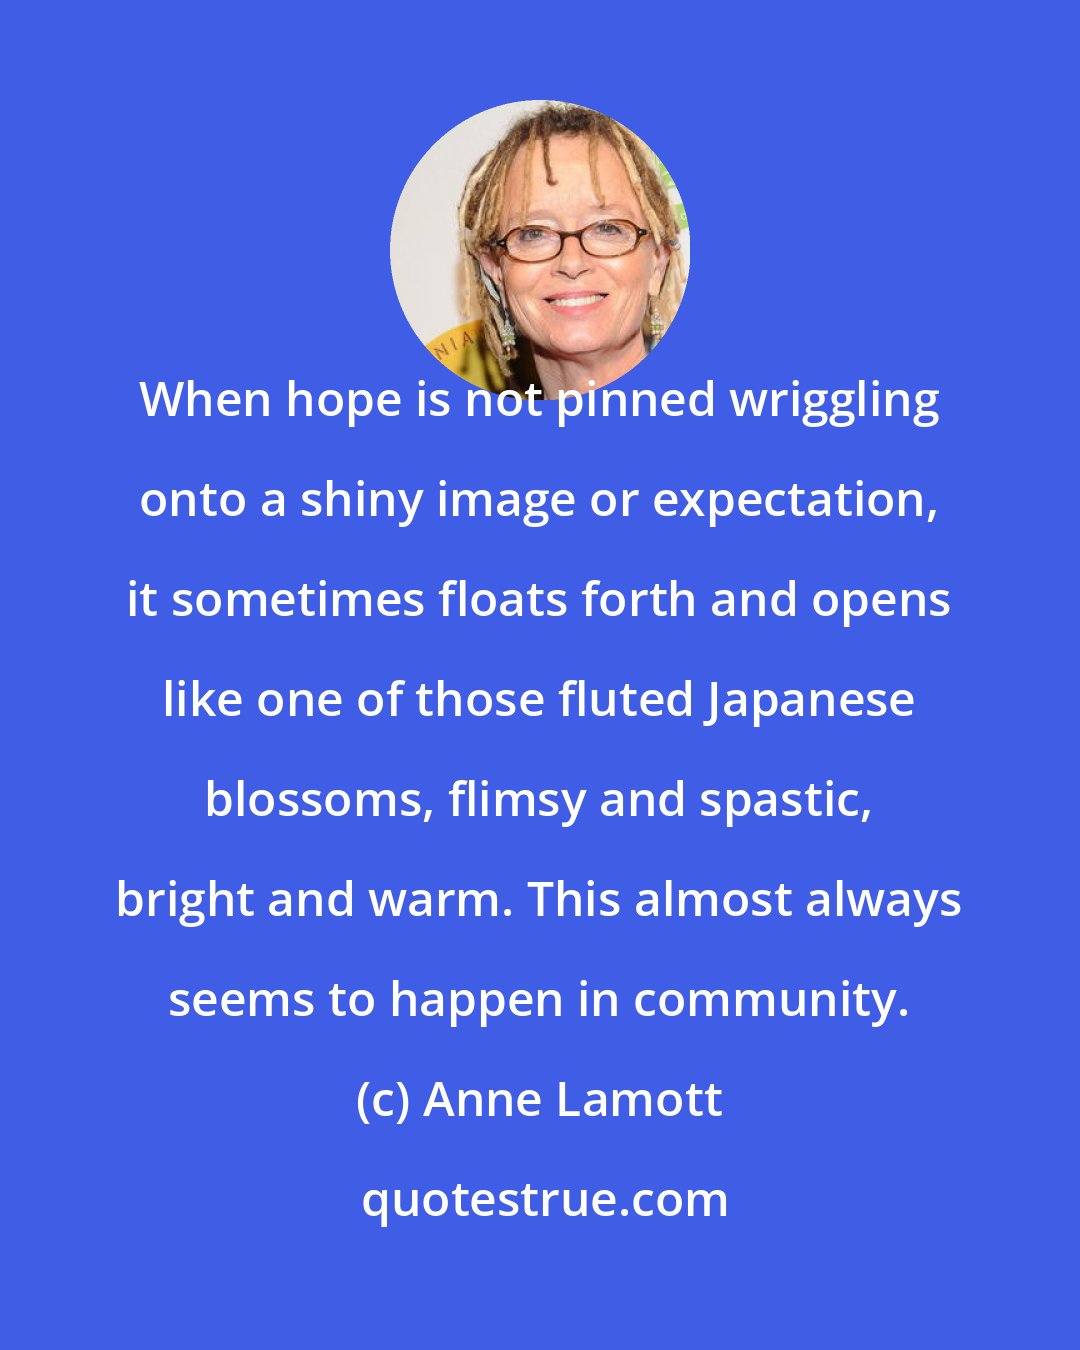 Anne Lamott: When hope is not pinned wriggling onto a shiny image or expectation, it sometimes floats forth and opens like one of those fluted Japanese blossoms, flimsy and spastic, bright and warm. This almost always seems to happen in community.